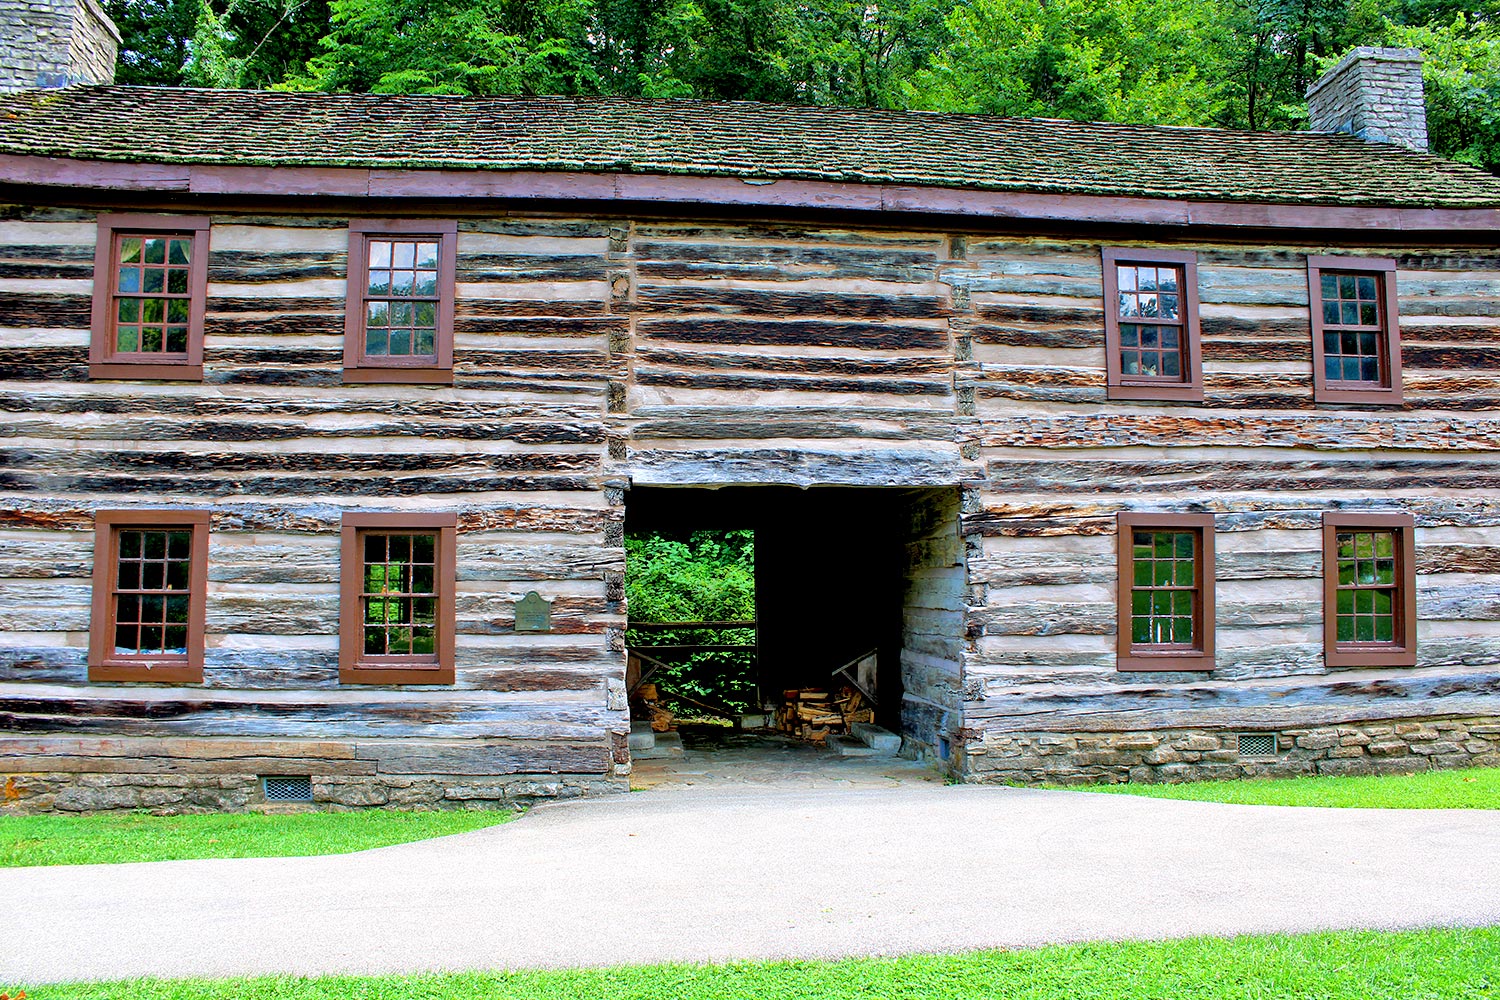 Pioneer Village at Spring Mill State Park